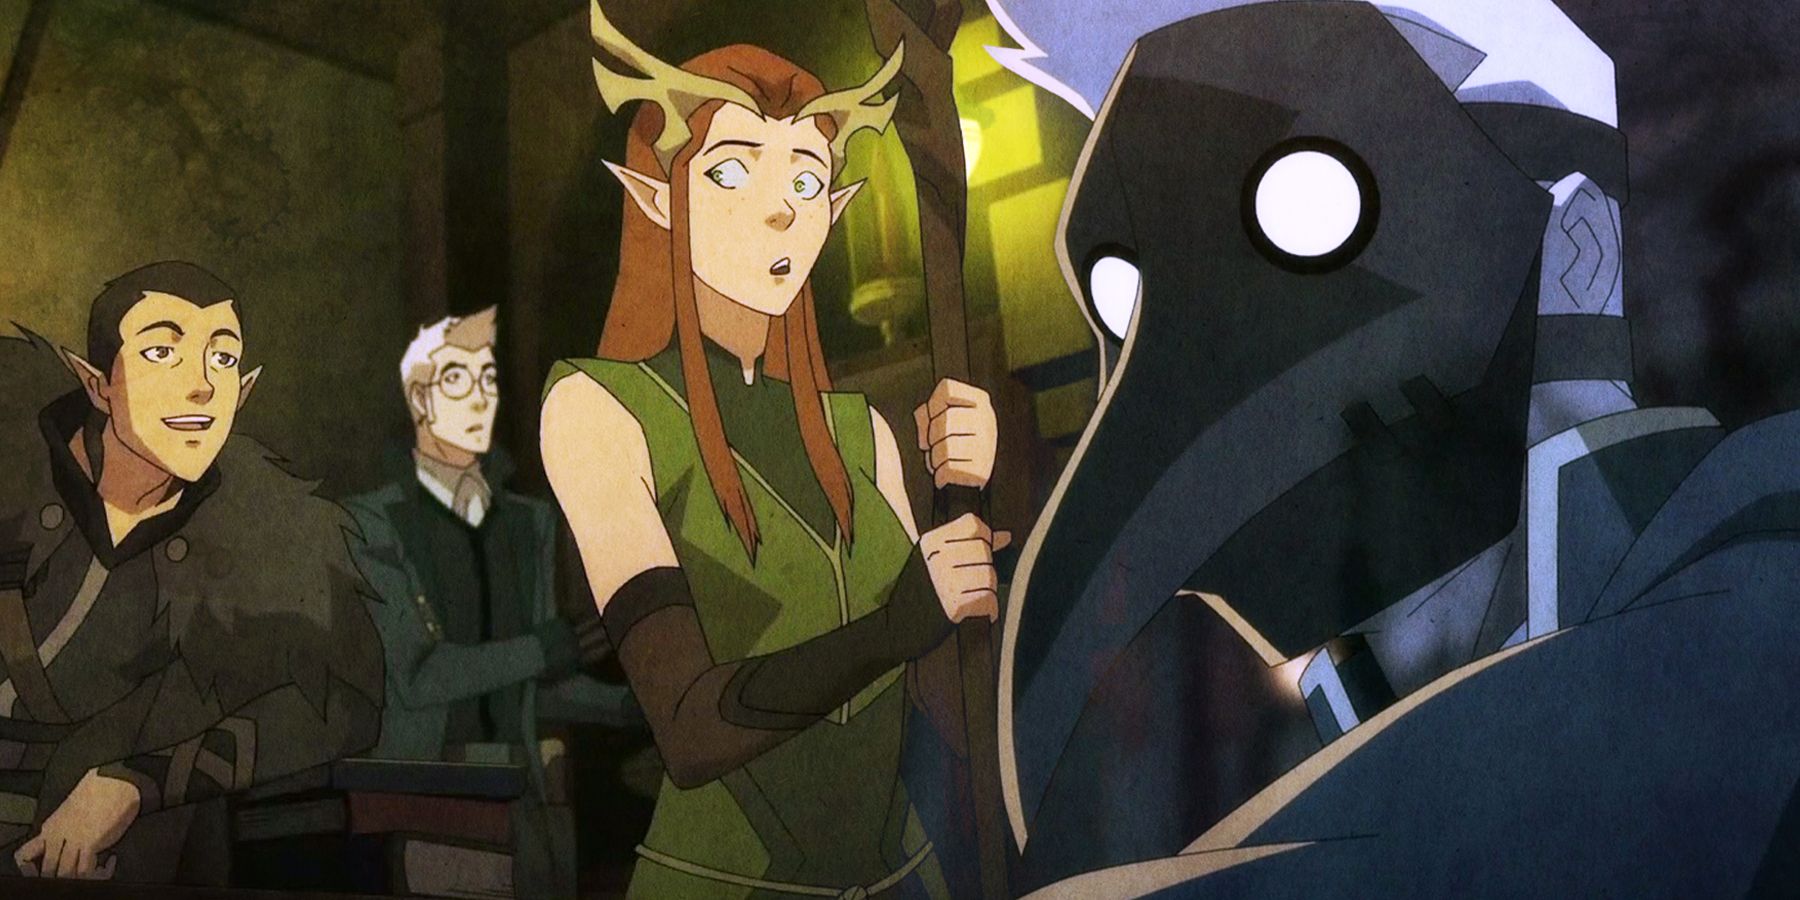 New Details for Legend of Vox Machina Season 2 Revealed, First Look at  Beloved Critical Role Characters